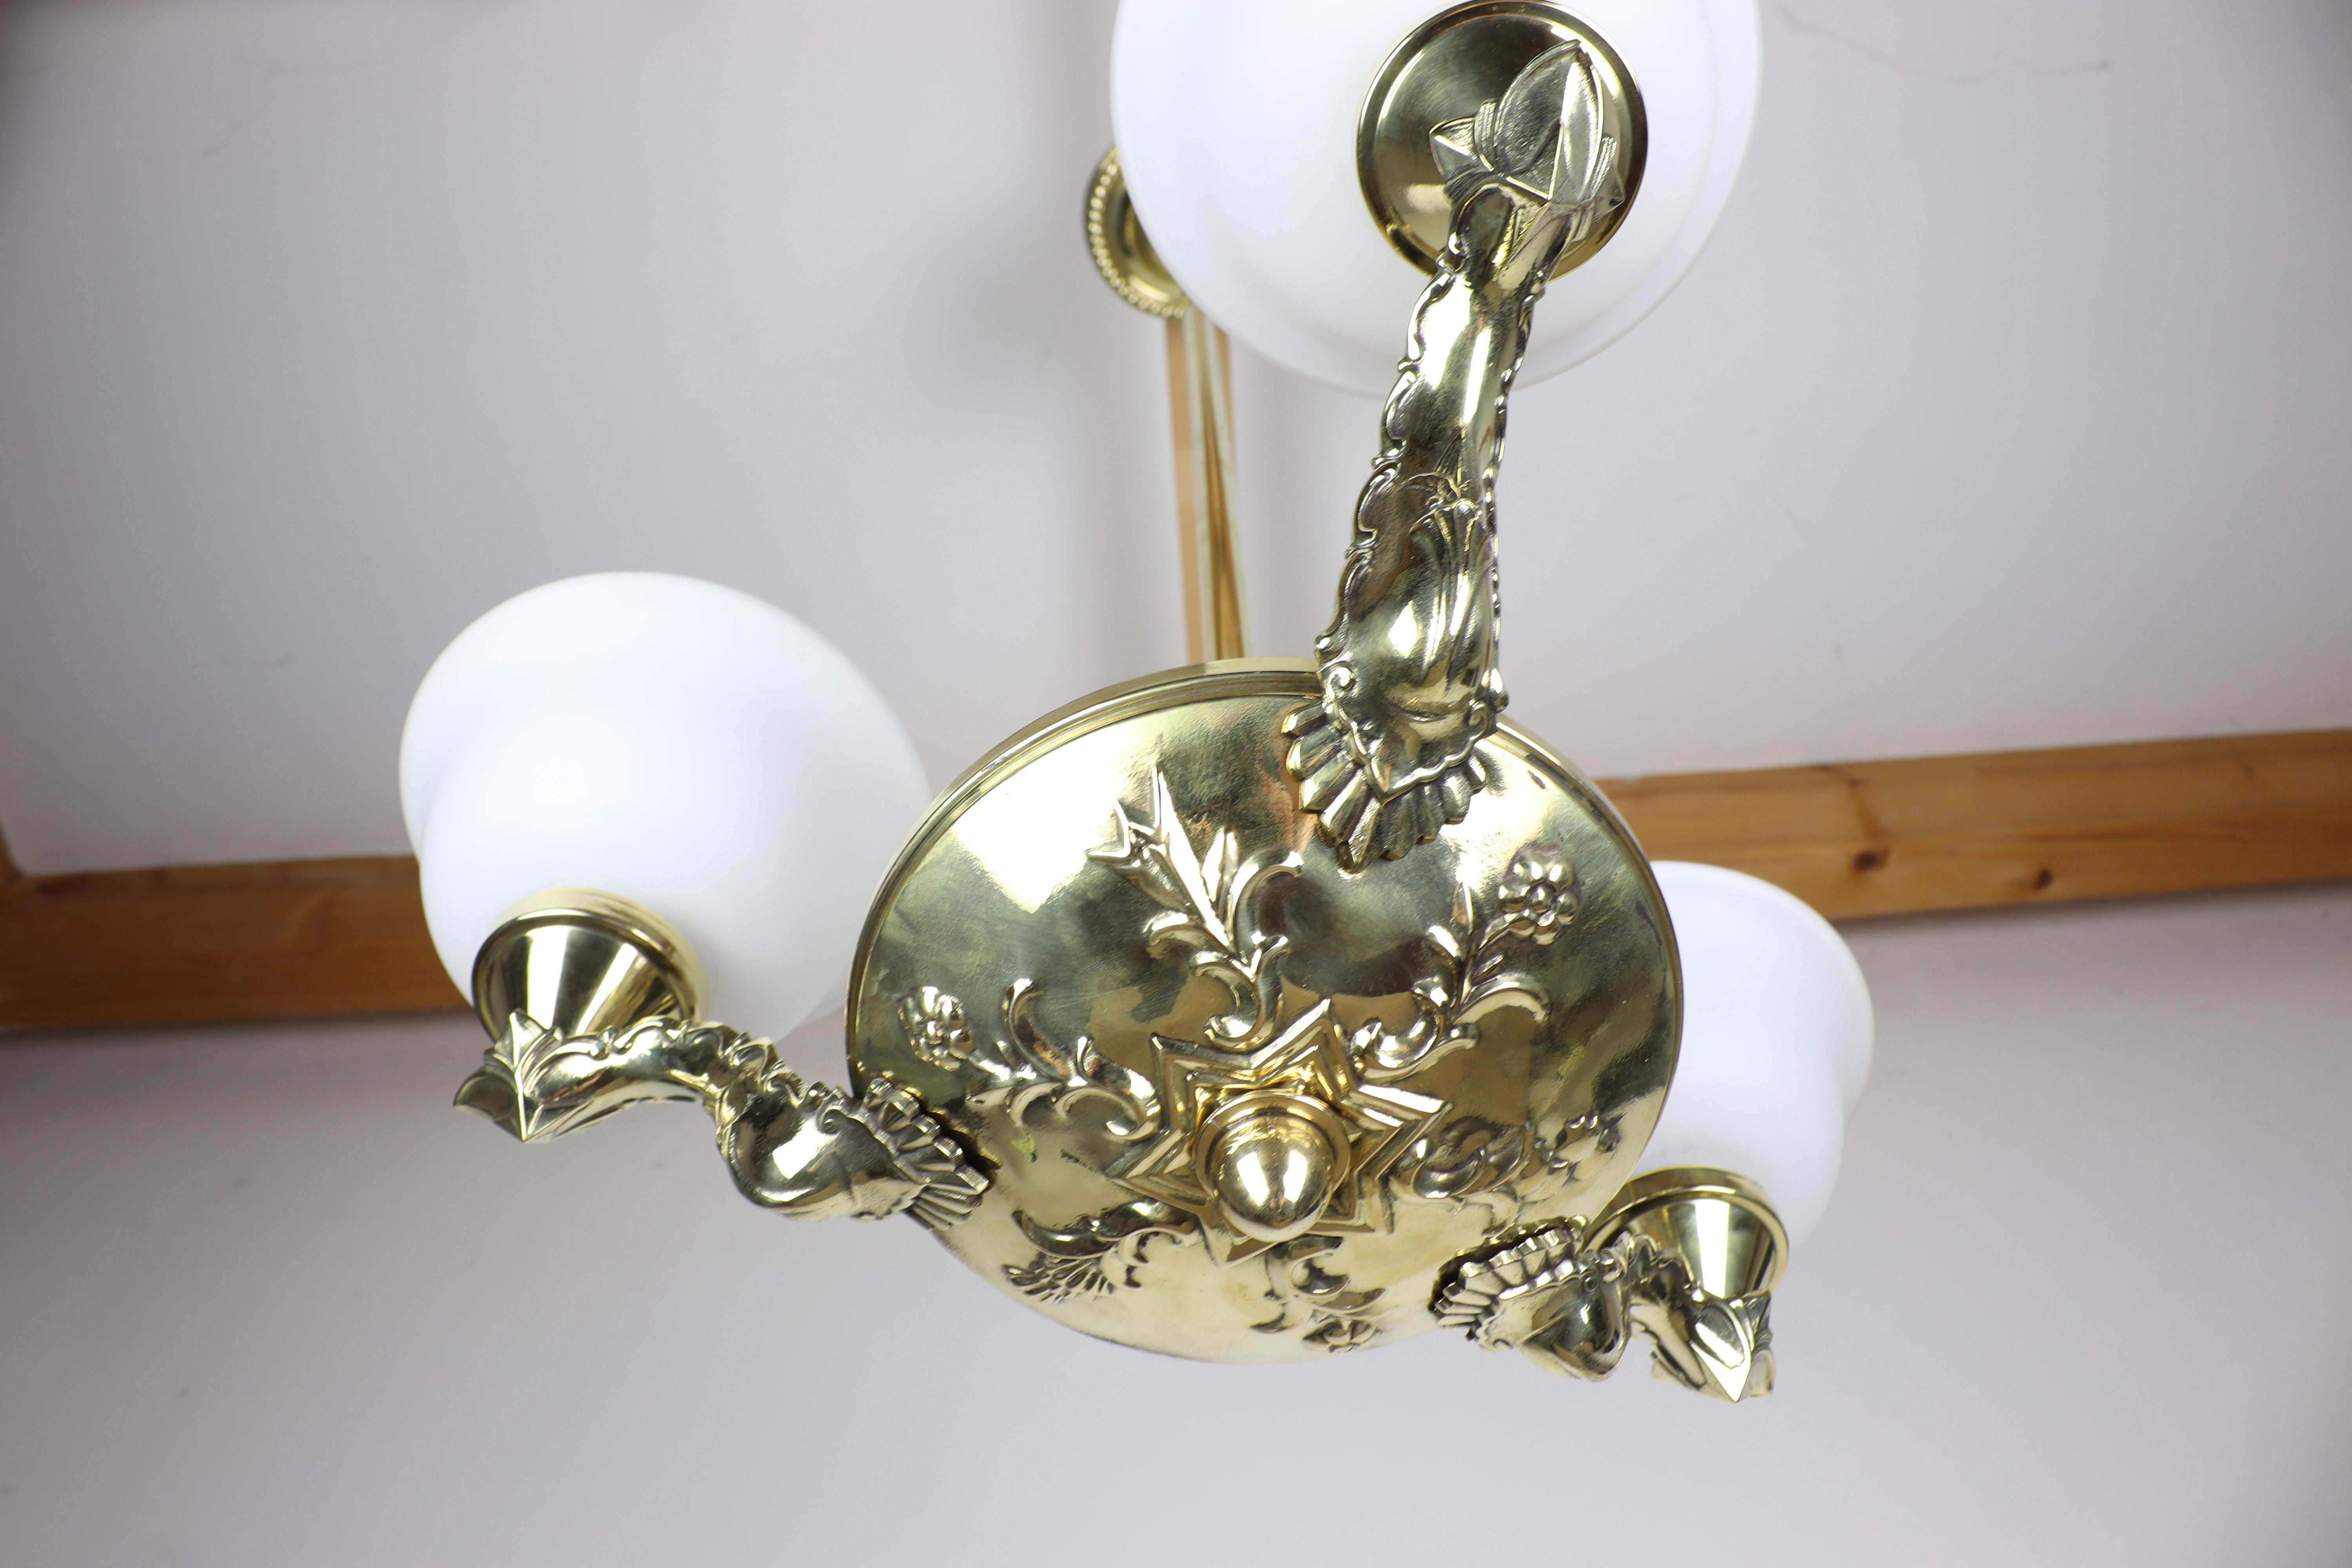 This luxurious-looking chandelier dates back to the Art Nouveau period. You will be fascinated by the beautifully elaborate embossed base of its three-shoulder design together with the glass shades in white adds elegance to the chandelier. This is a